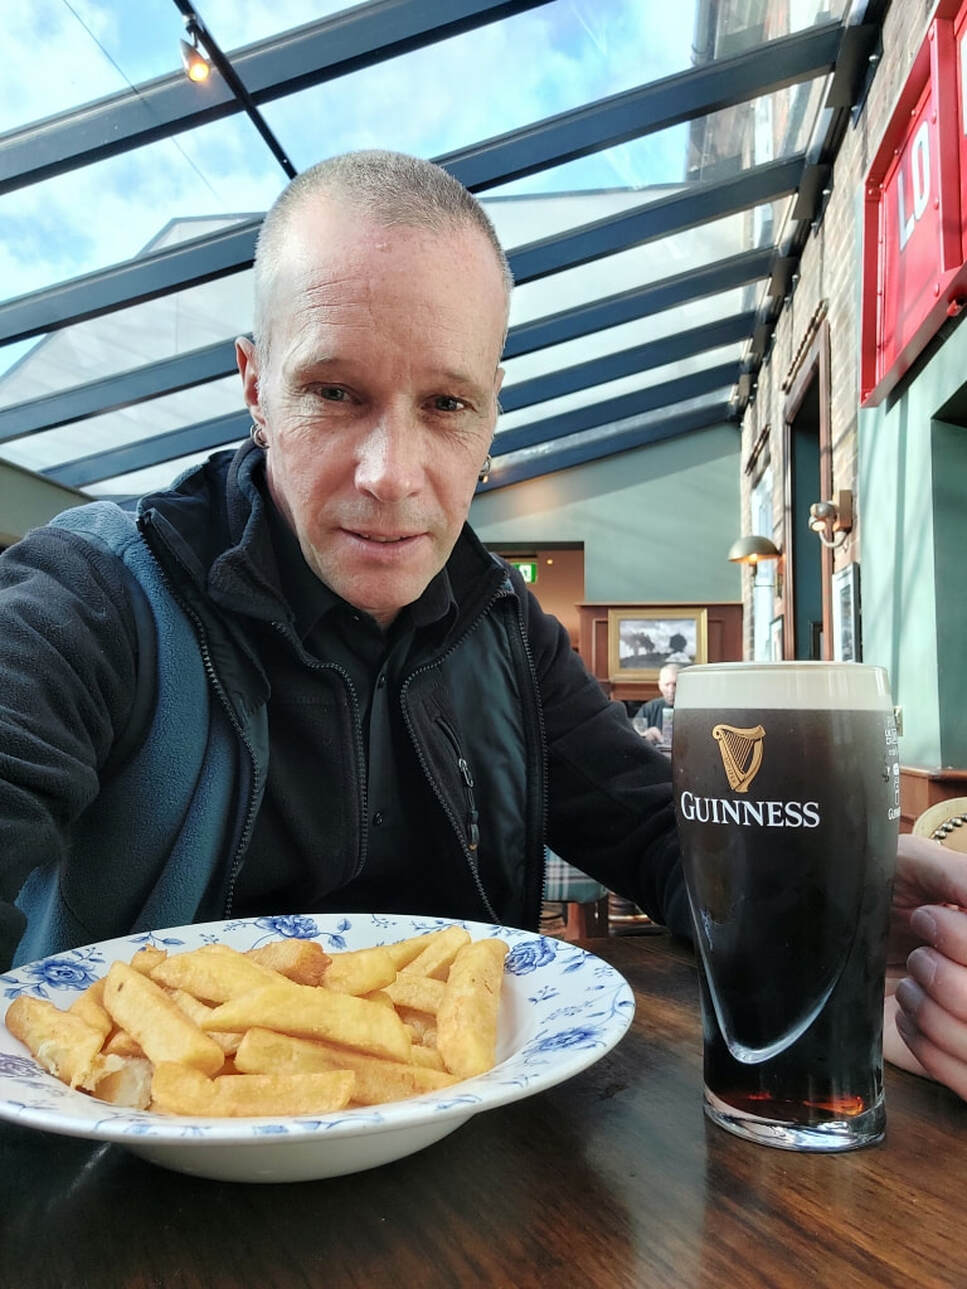 Chips and a Guinness at Whetherspoons in Bletchley